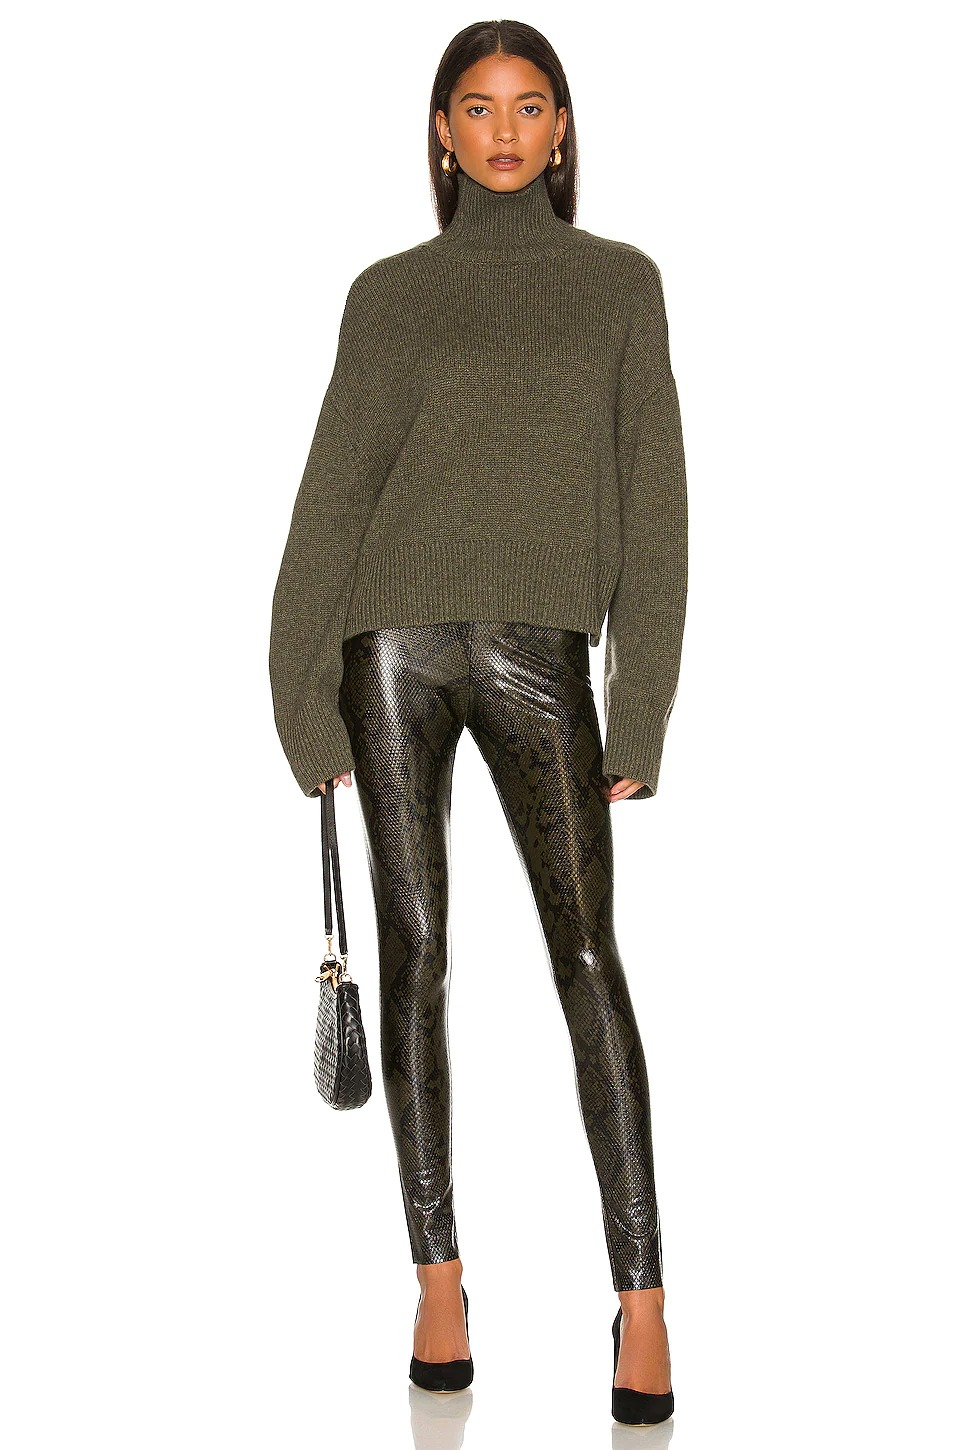 The 29 Best Faux-Leather Leggings of 2022 | Who What Wear